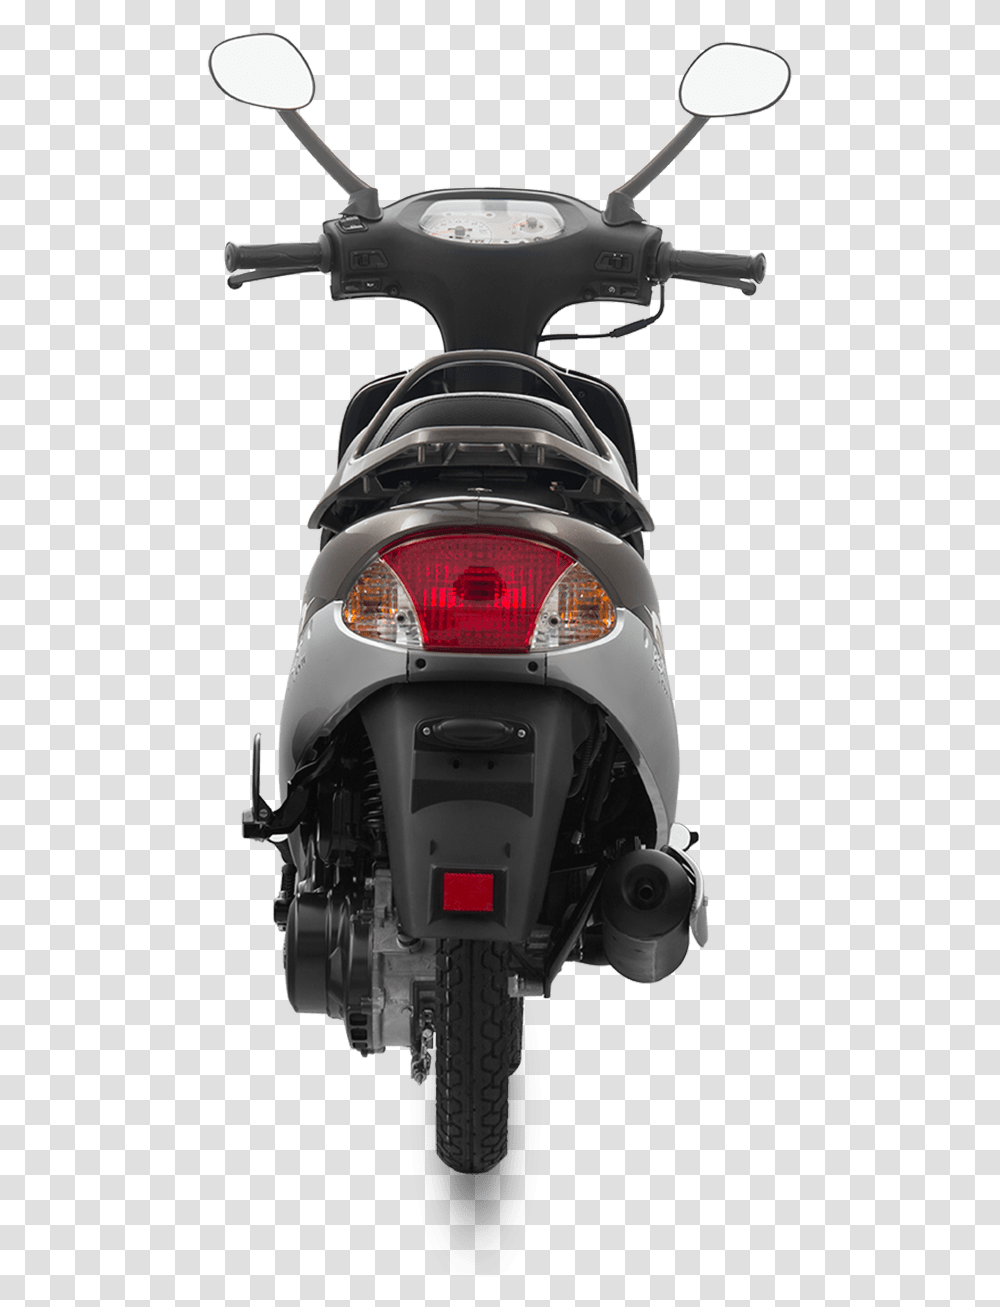 Tvs Scooty Pepty Rea Cruiser, Motorcycle, Vehicle, Transportation, Motor Scooter Transparent Png